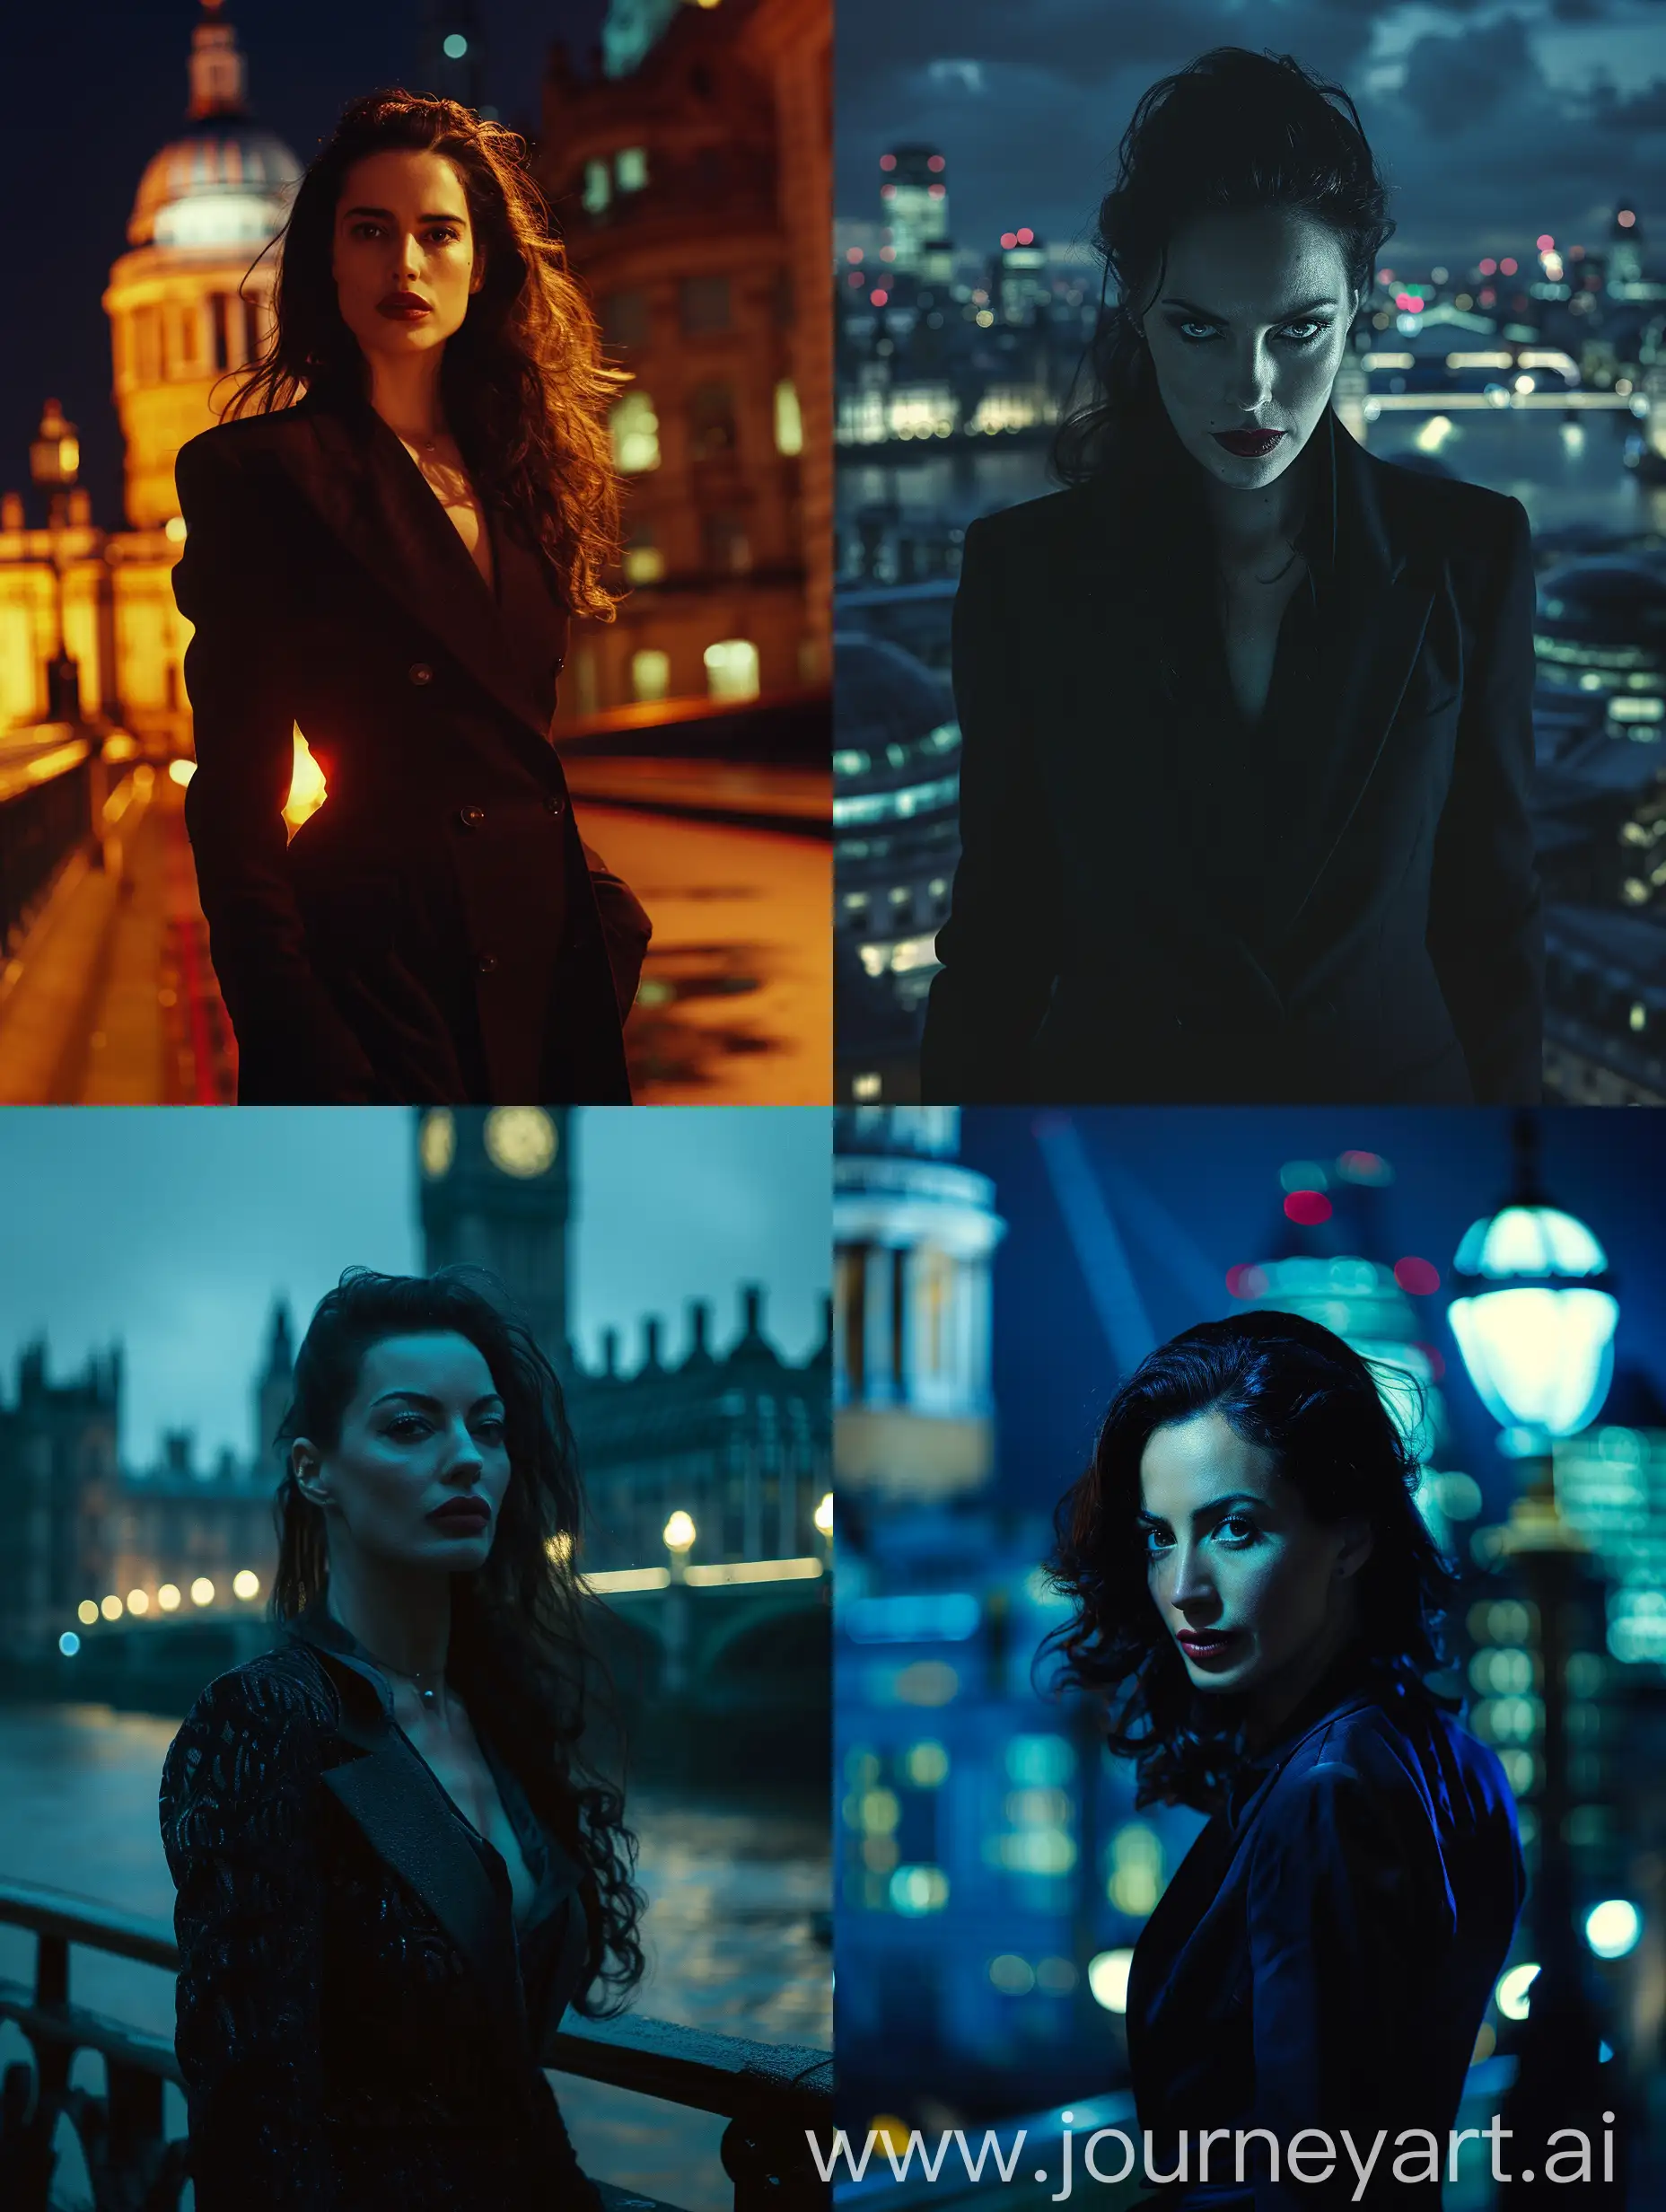 Cinematic, low key photo, vempire woman and night london background, intense confidence and determination, intimidating. She has financial attire. directed by Ridley Scott, shot with Arriflex 35BL Camera. Canon K35 Prime Lenses, 70 mm -- style raw